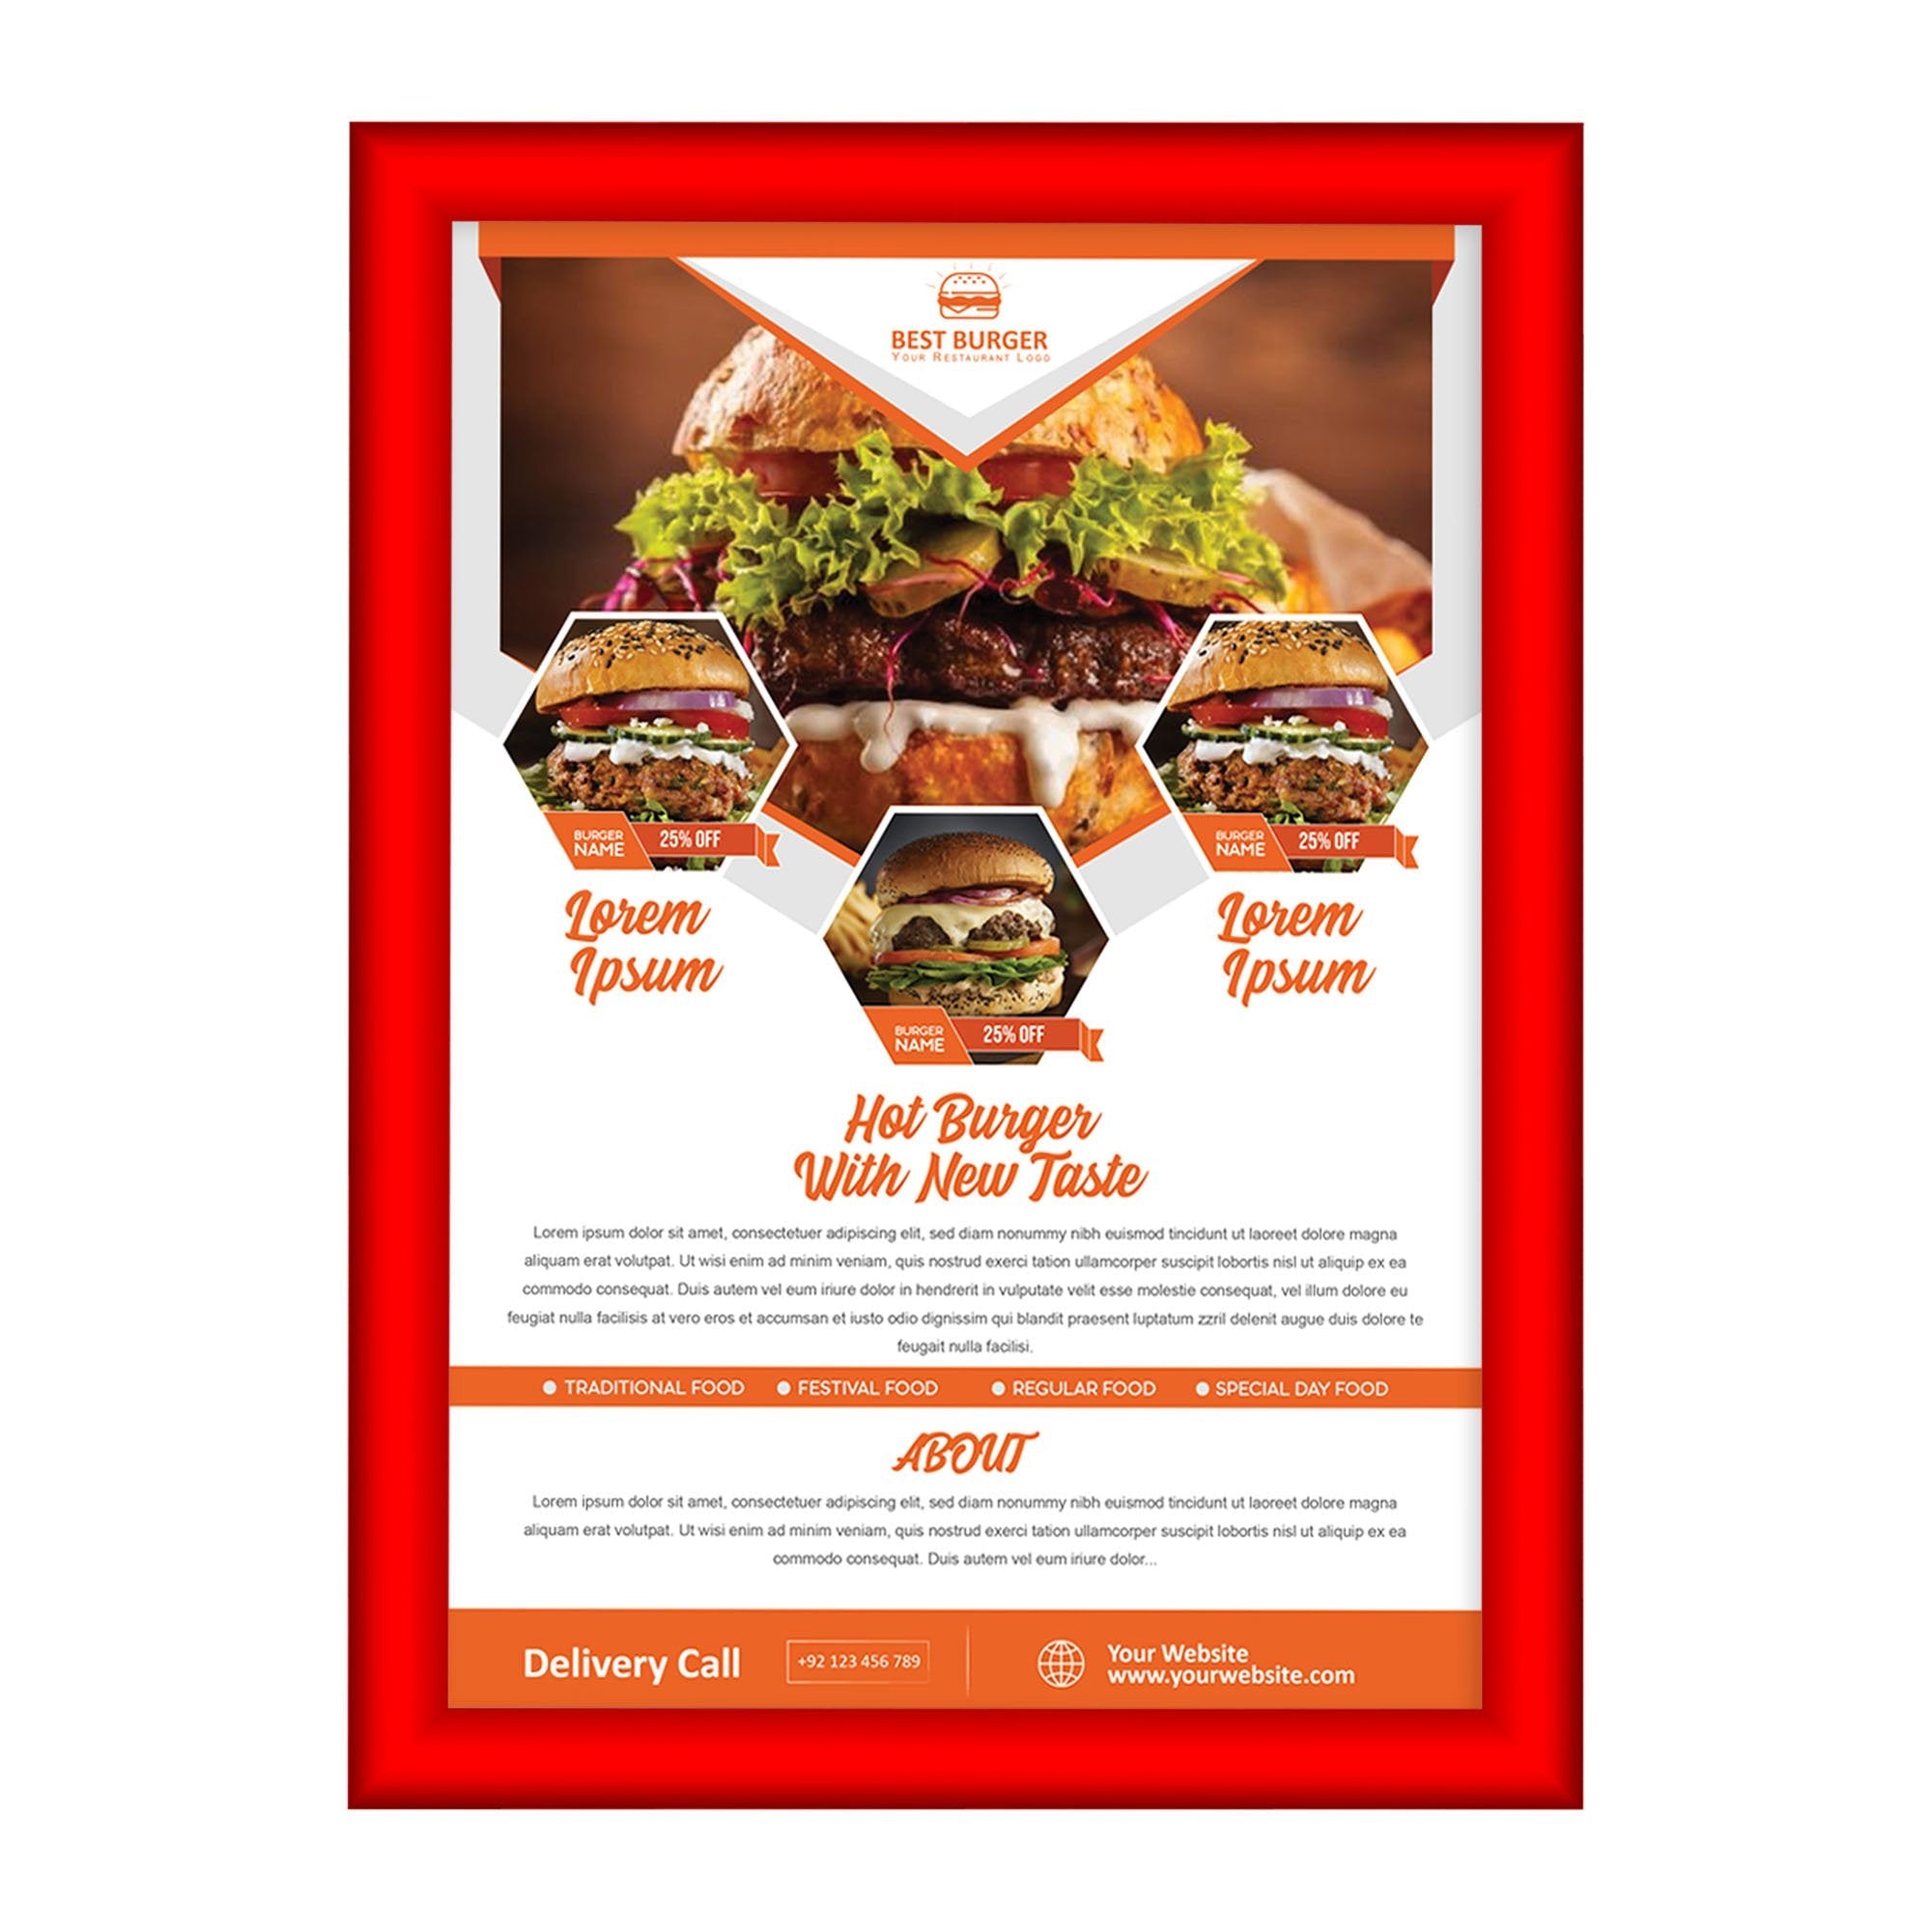 Dynamic Poster Stand - Double Sided – SnapeZo.Utility